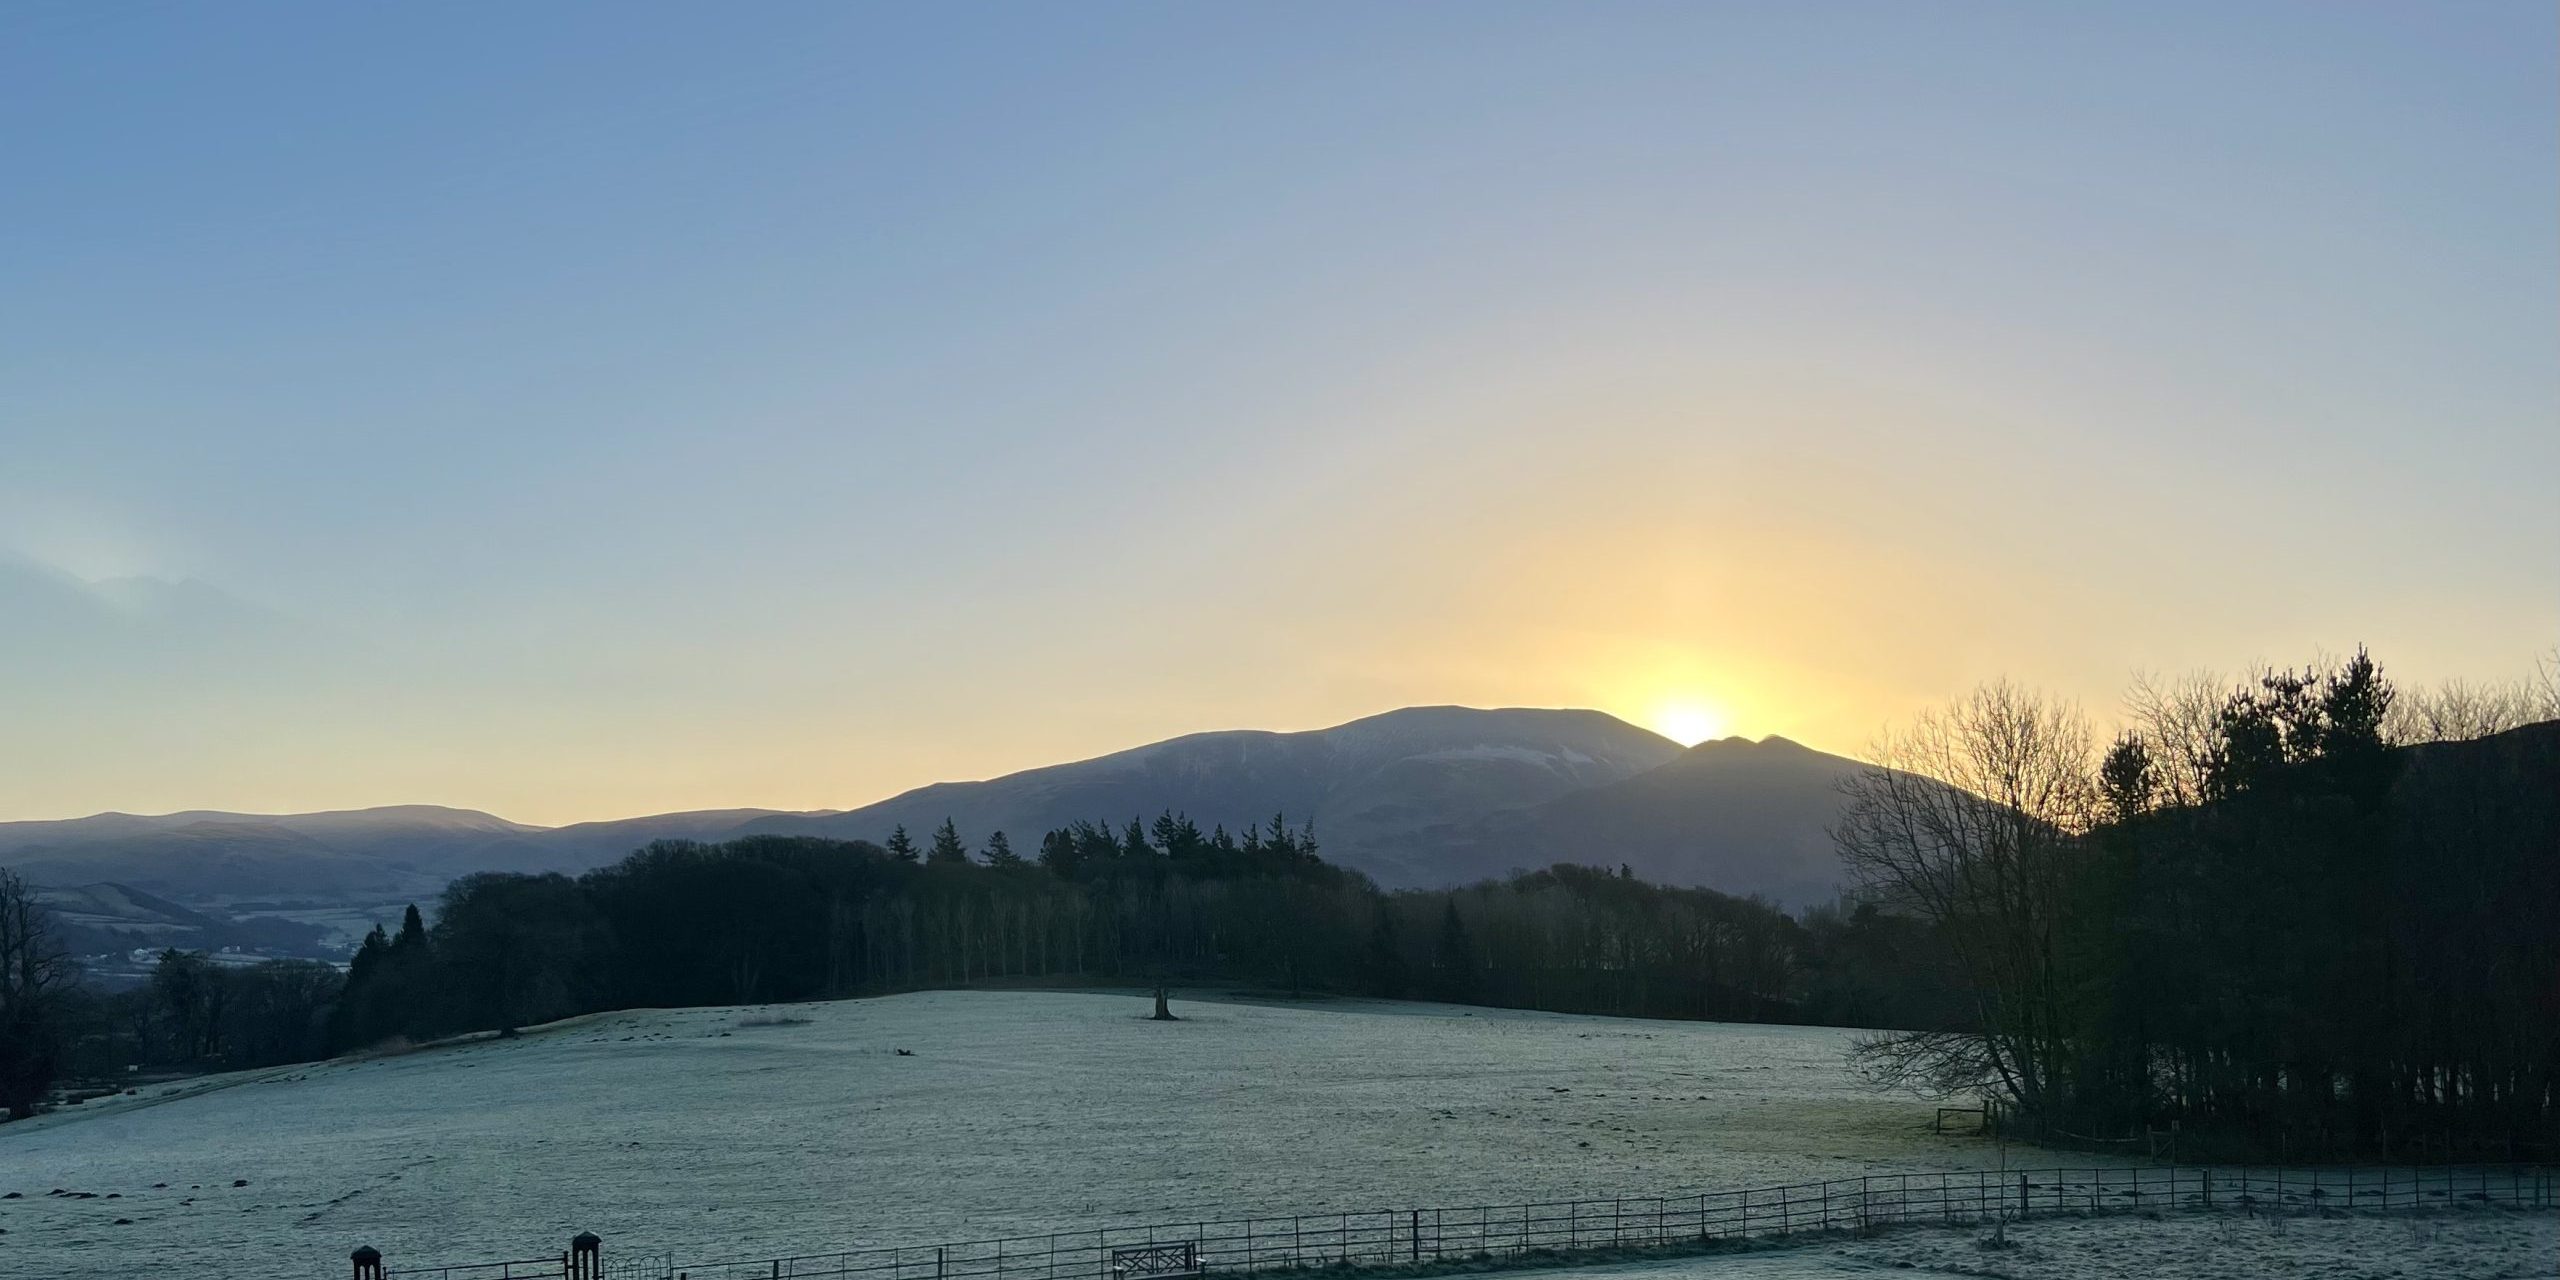 Sunrise over Skiddaw - the view from Higham Hall in early Spring